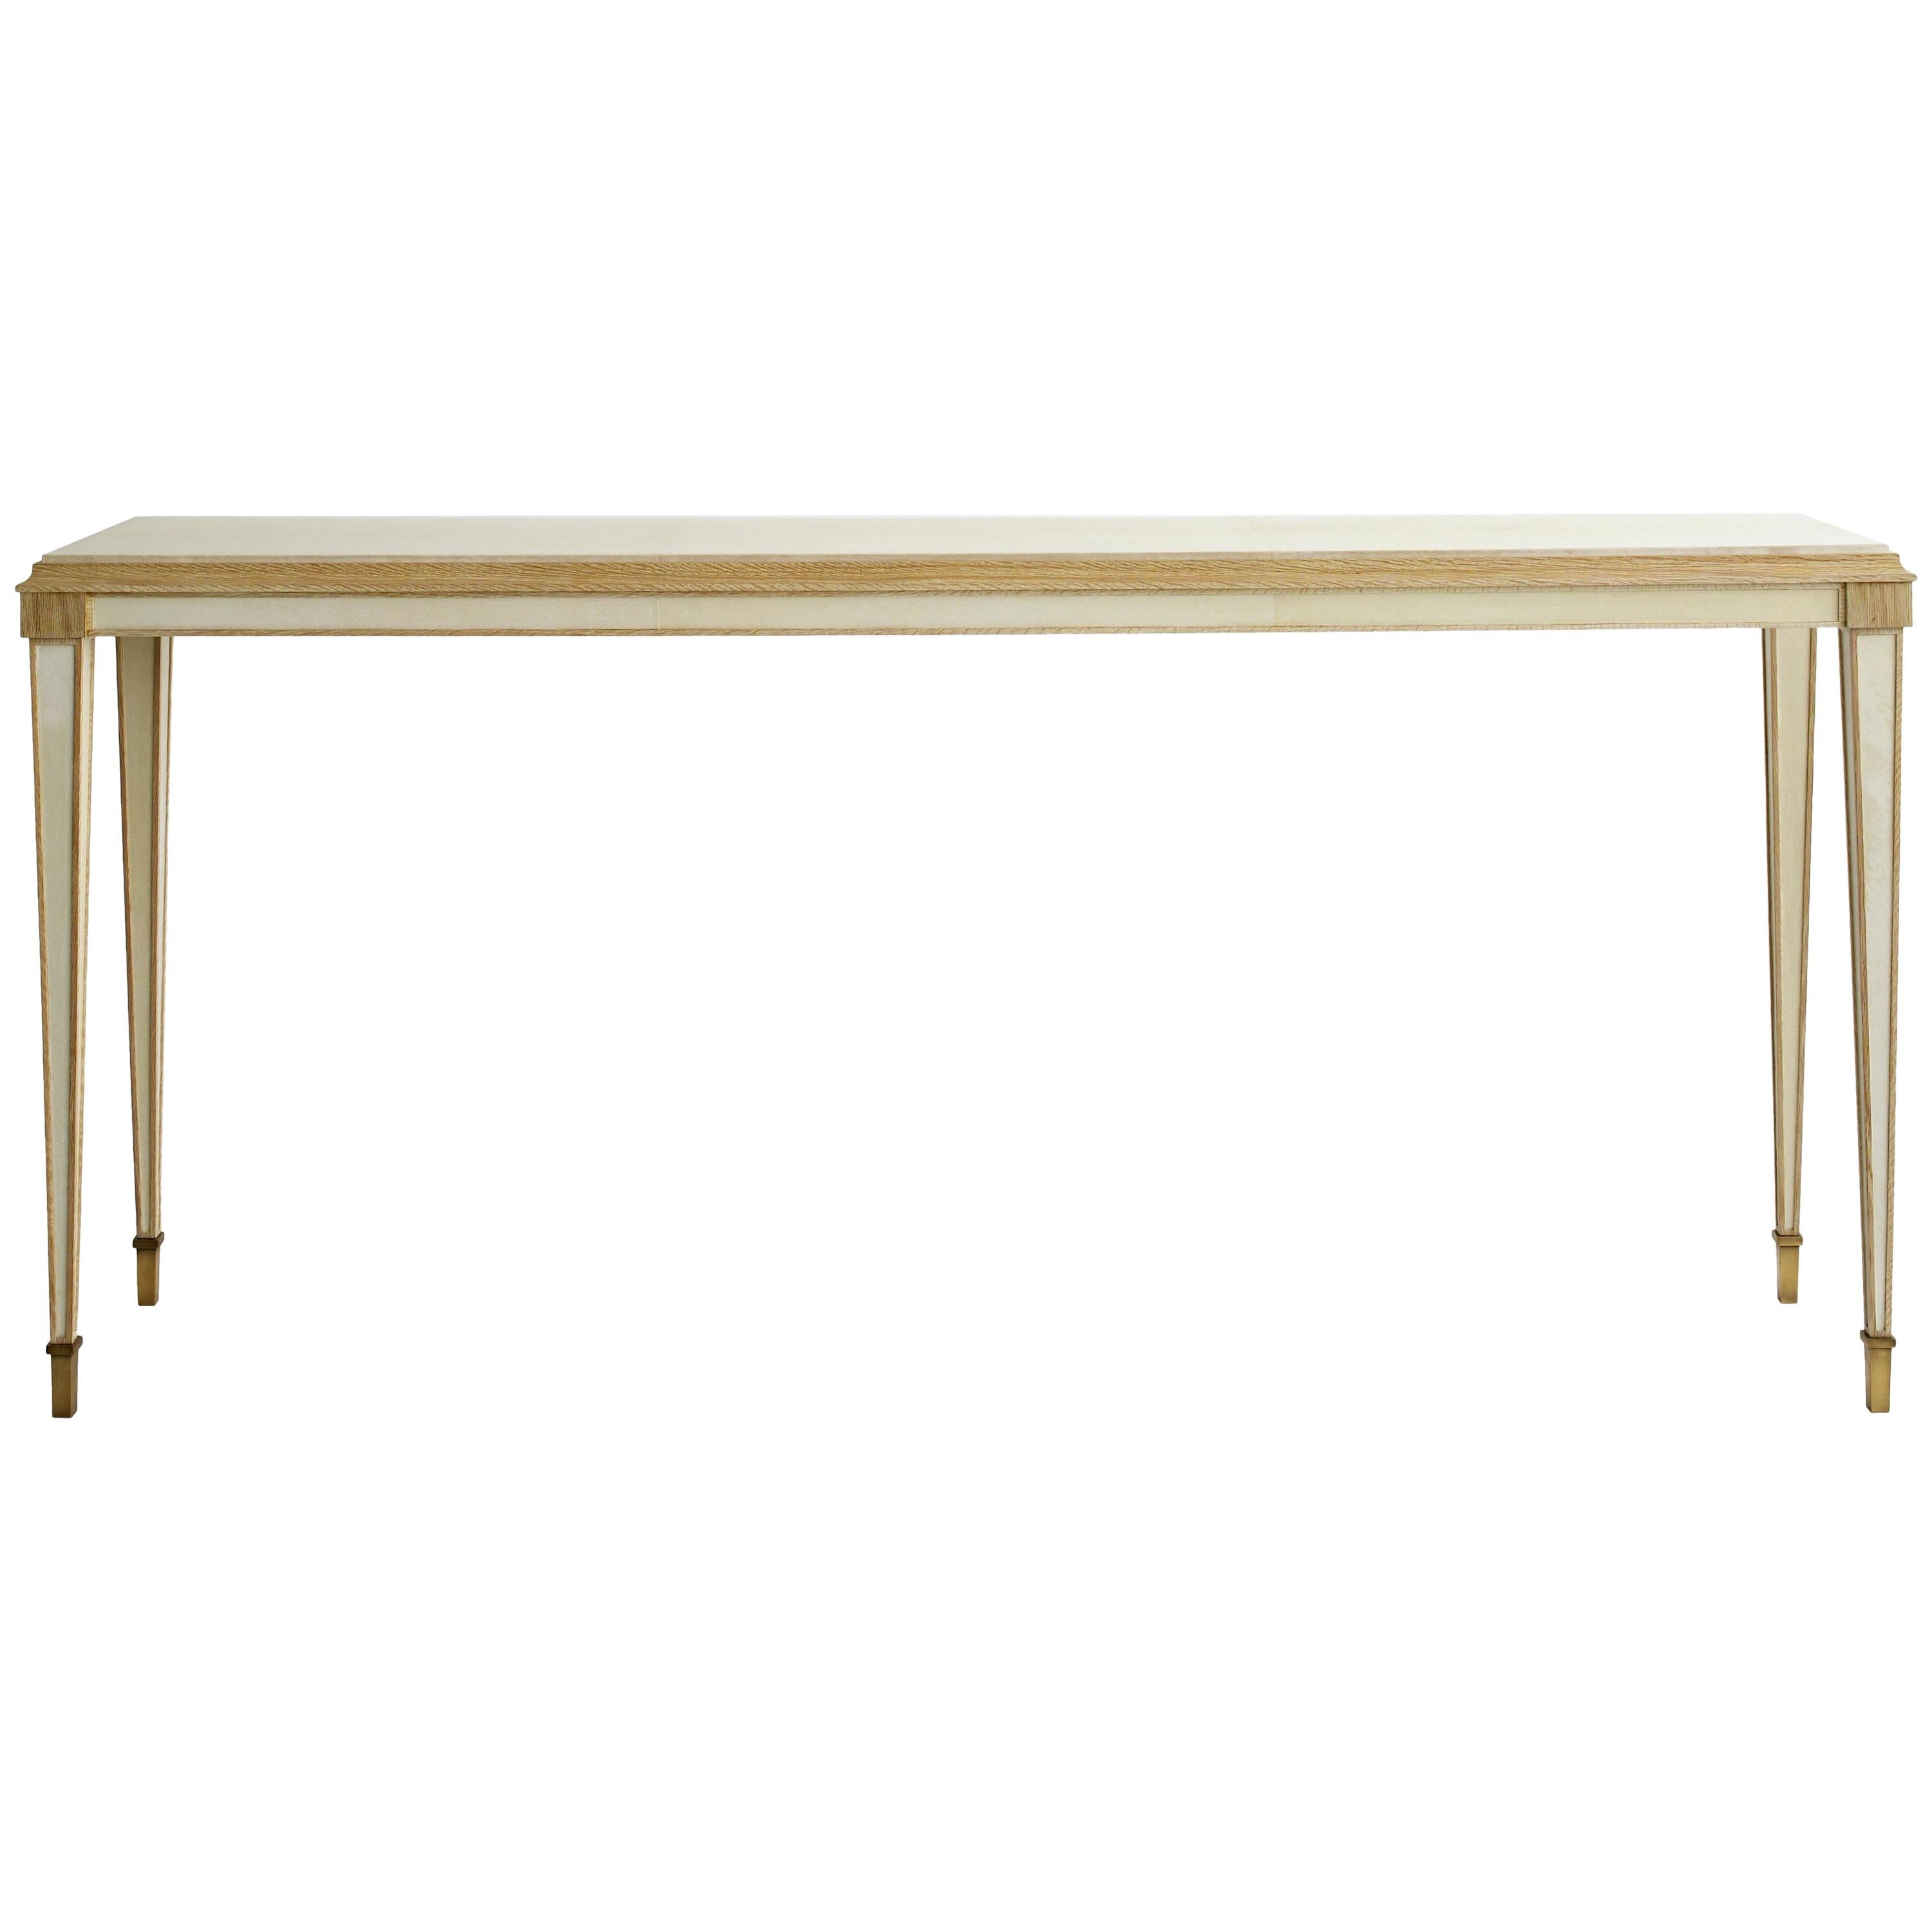 Parchment Console by Billy Cotton in Bleached Oak, Parchment and Brass For Sale